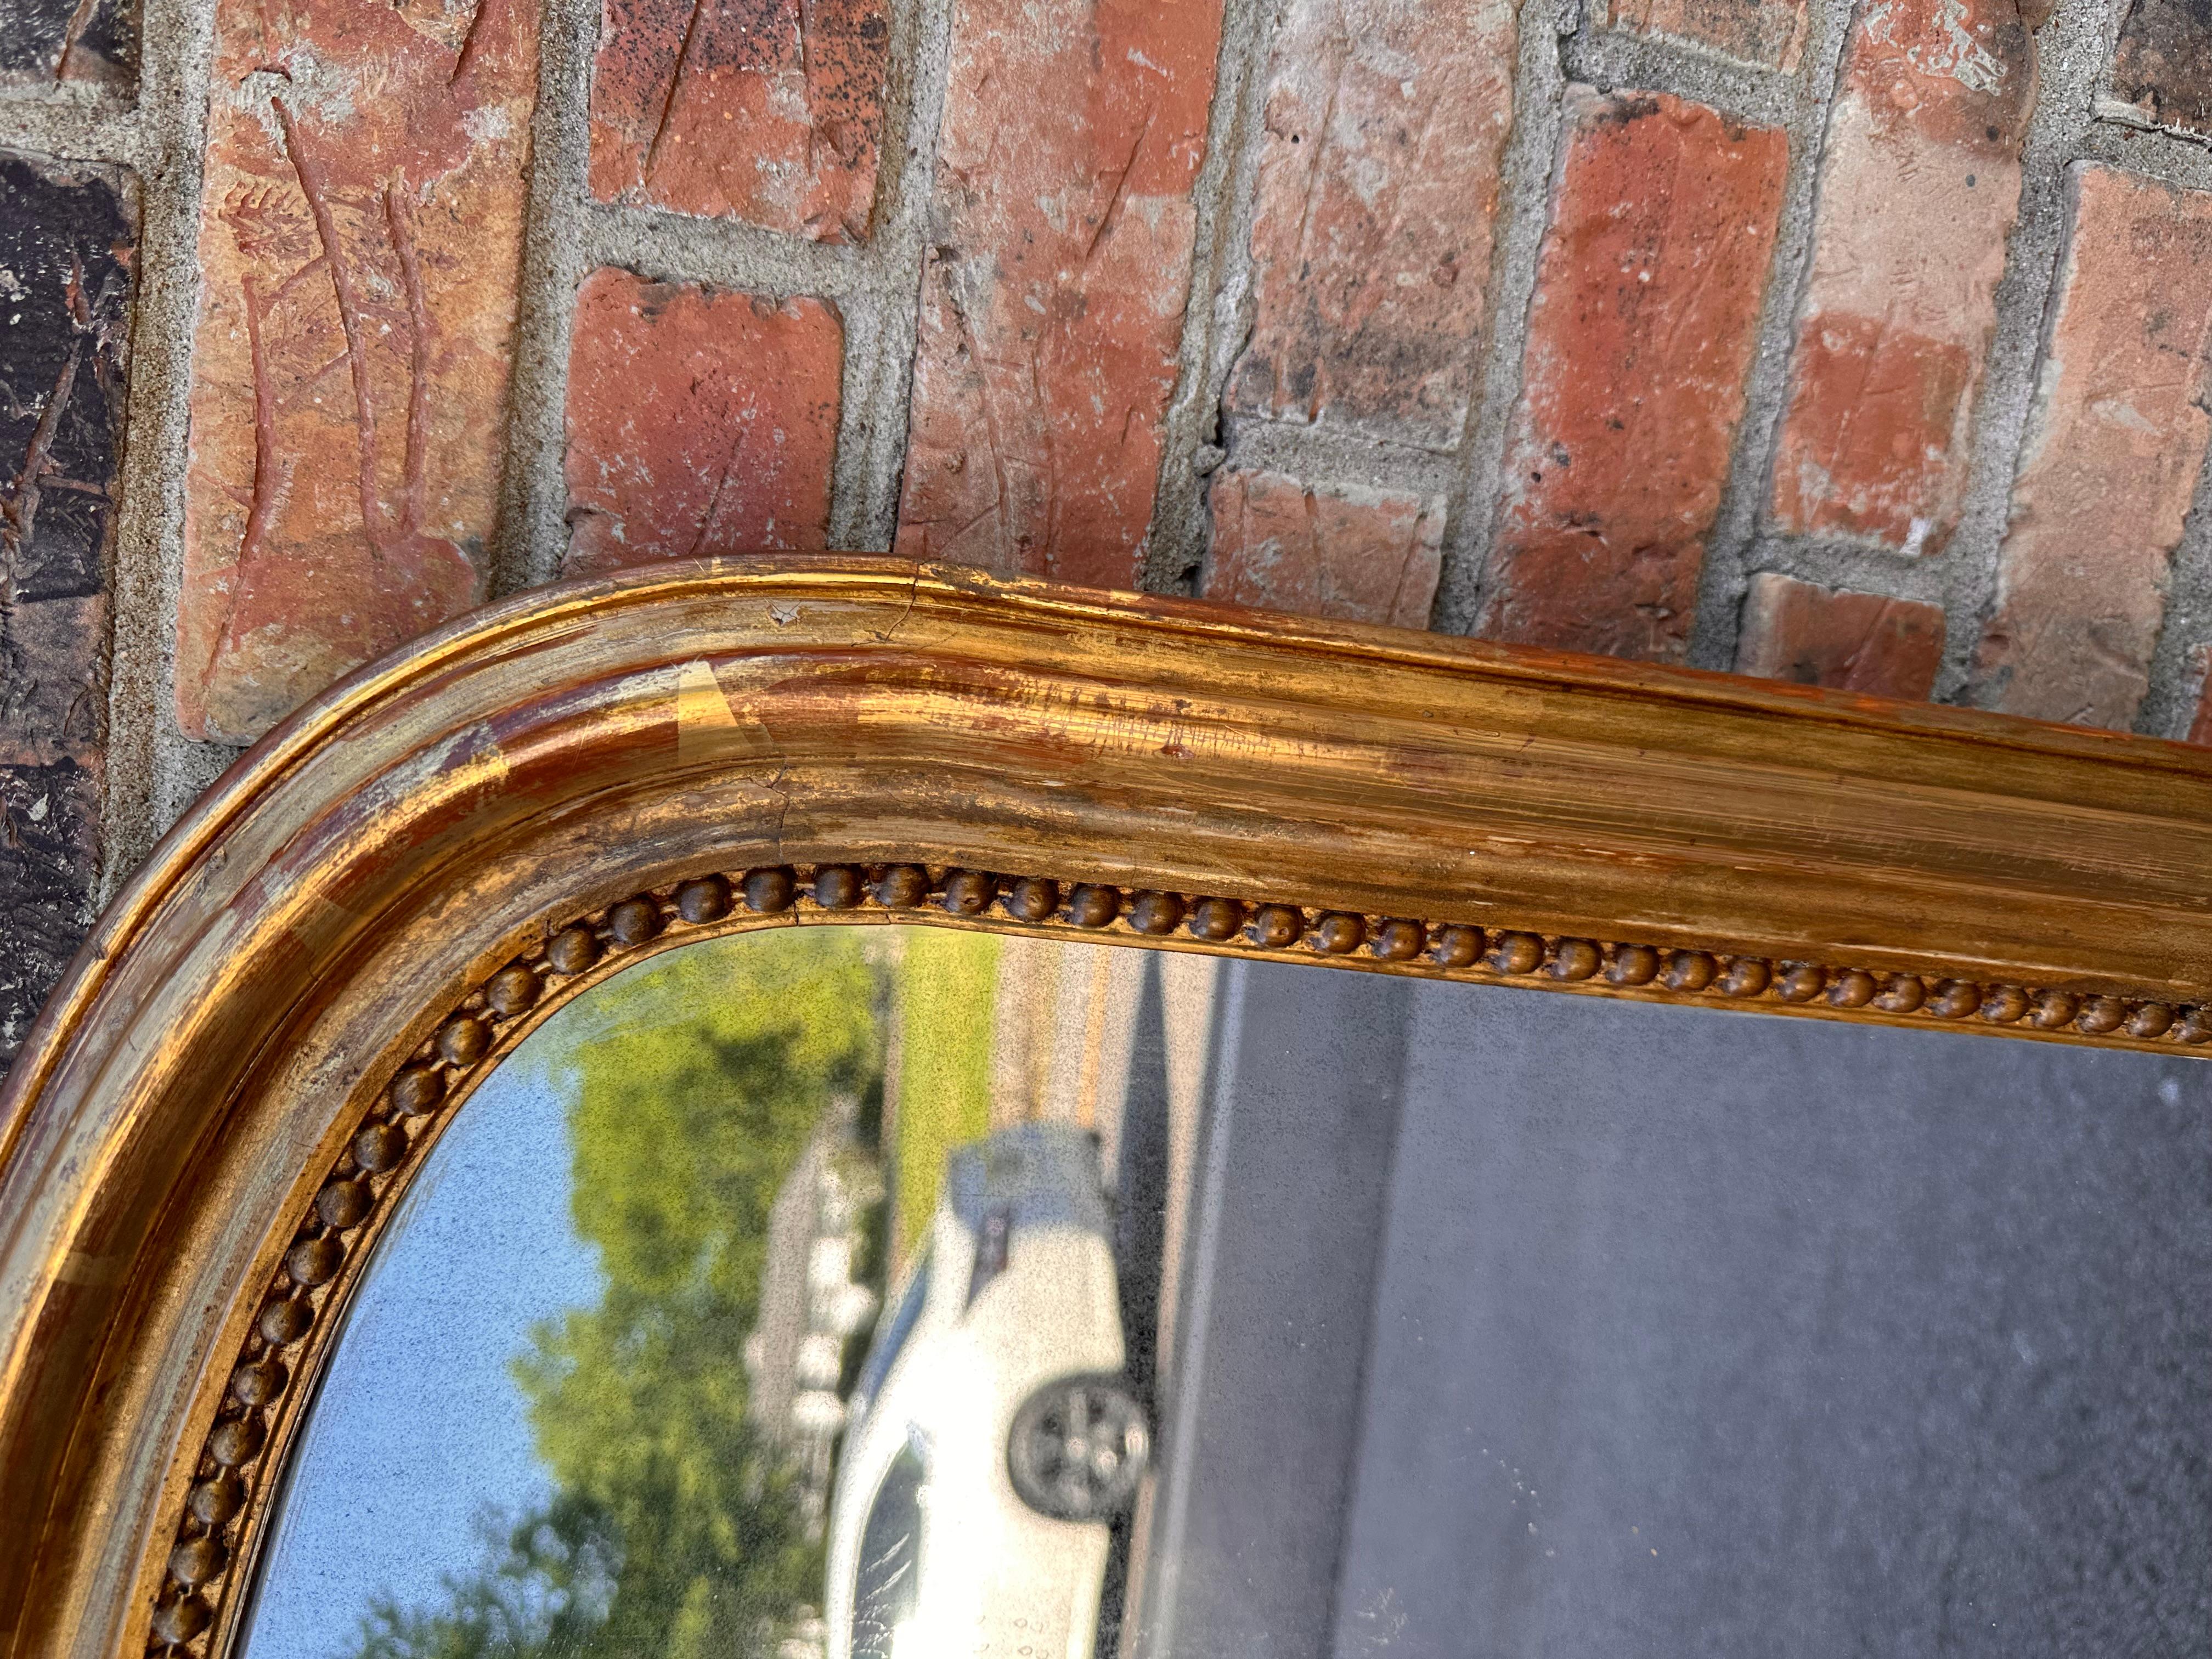 This 19th Century French mirror is top of its class! With its stunning gilded adornments such as its hand carved edging and the continuous radius of the outer edge, keeping clean lines around the perimeter. This mirror is bound to make a grand